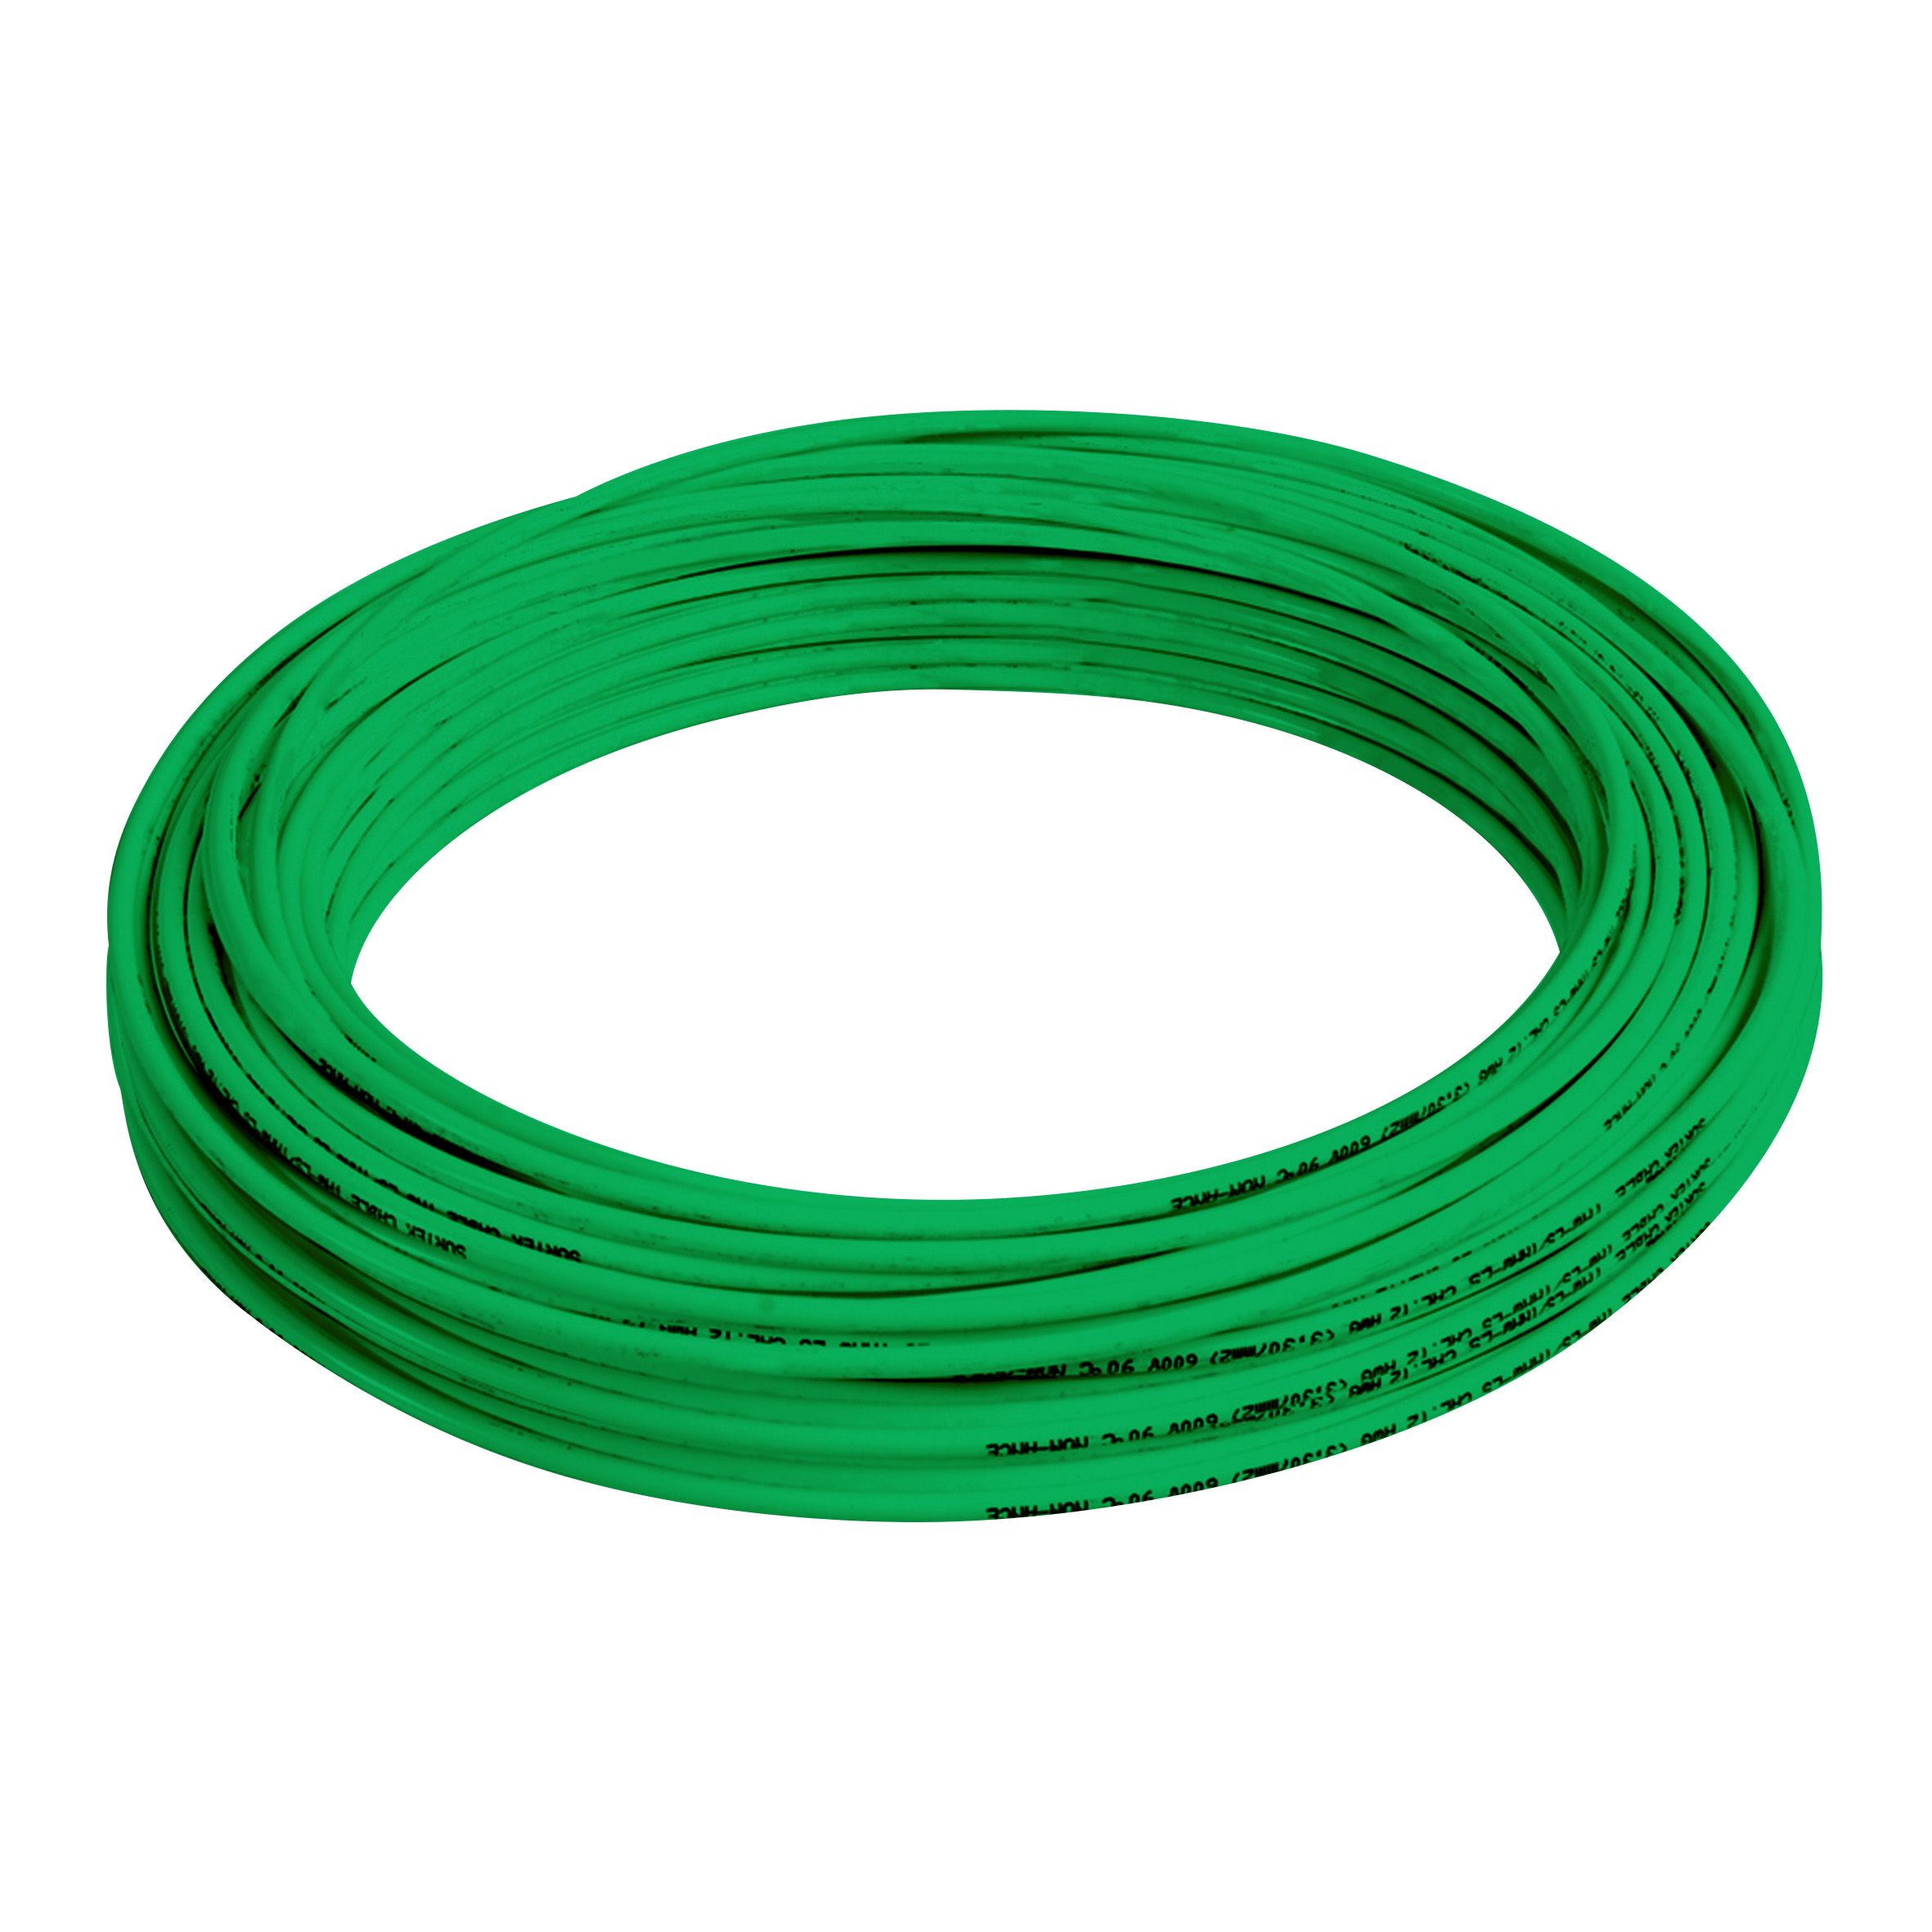 Cable eléctrico tipo THW-LS / THHW-LS Cal.12 100m verde